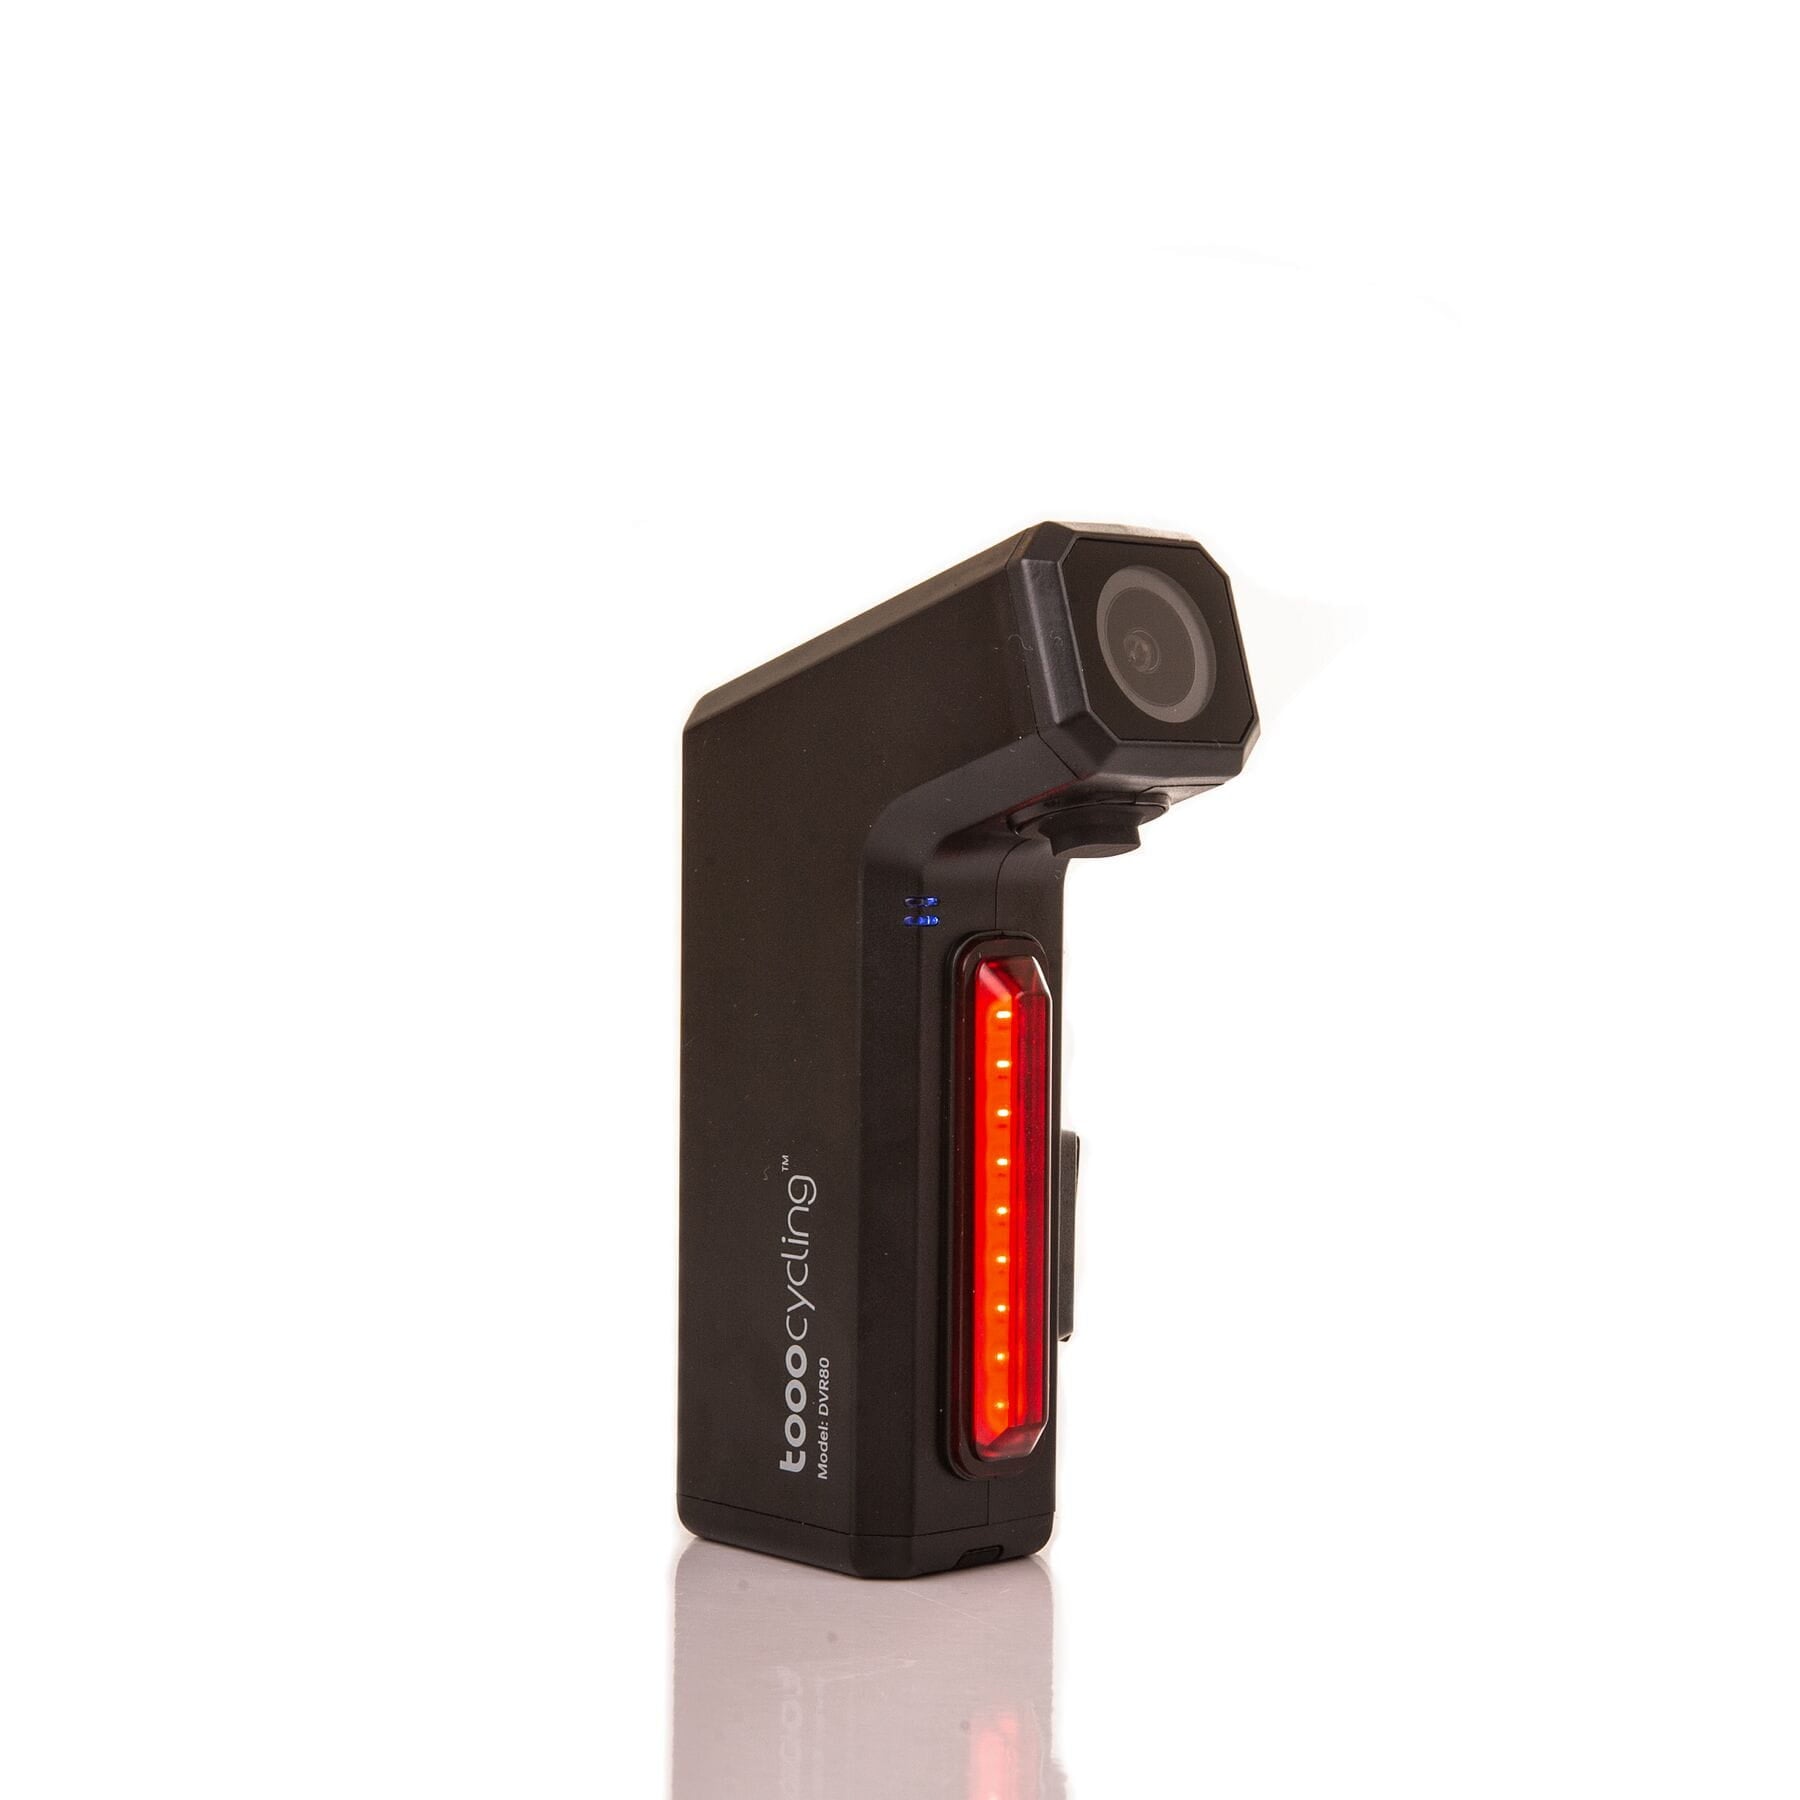 Bike Camera + Safety Lights. The dashcam engineered for cyclists.